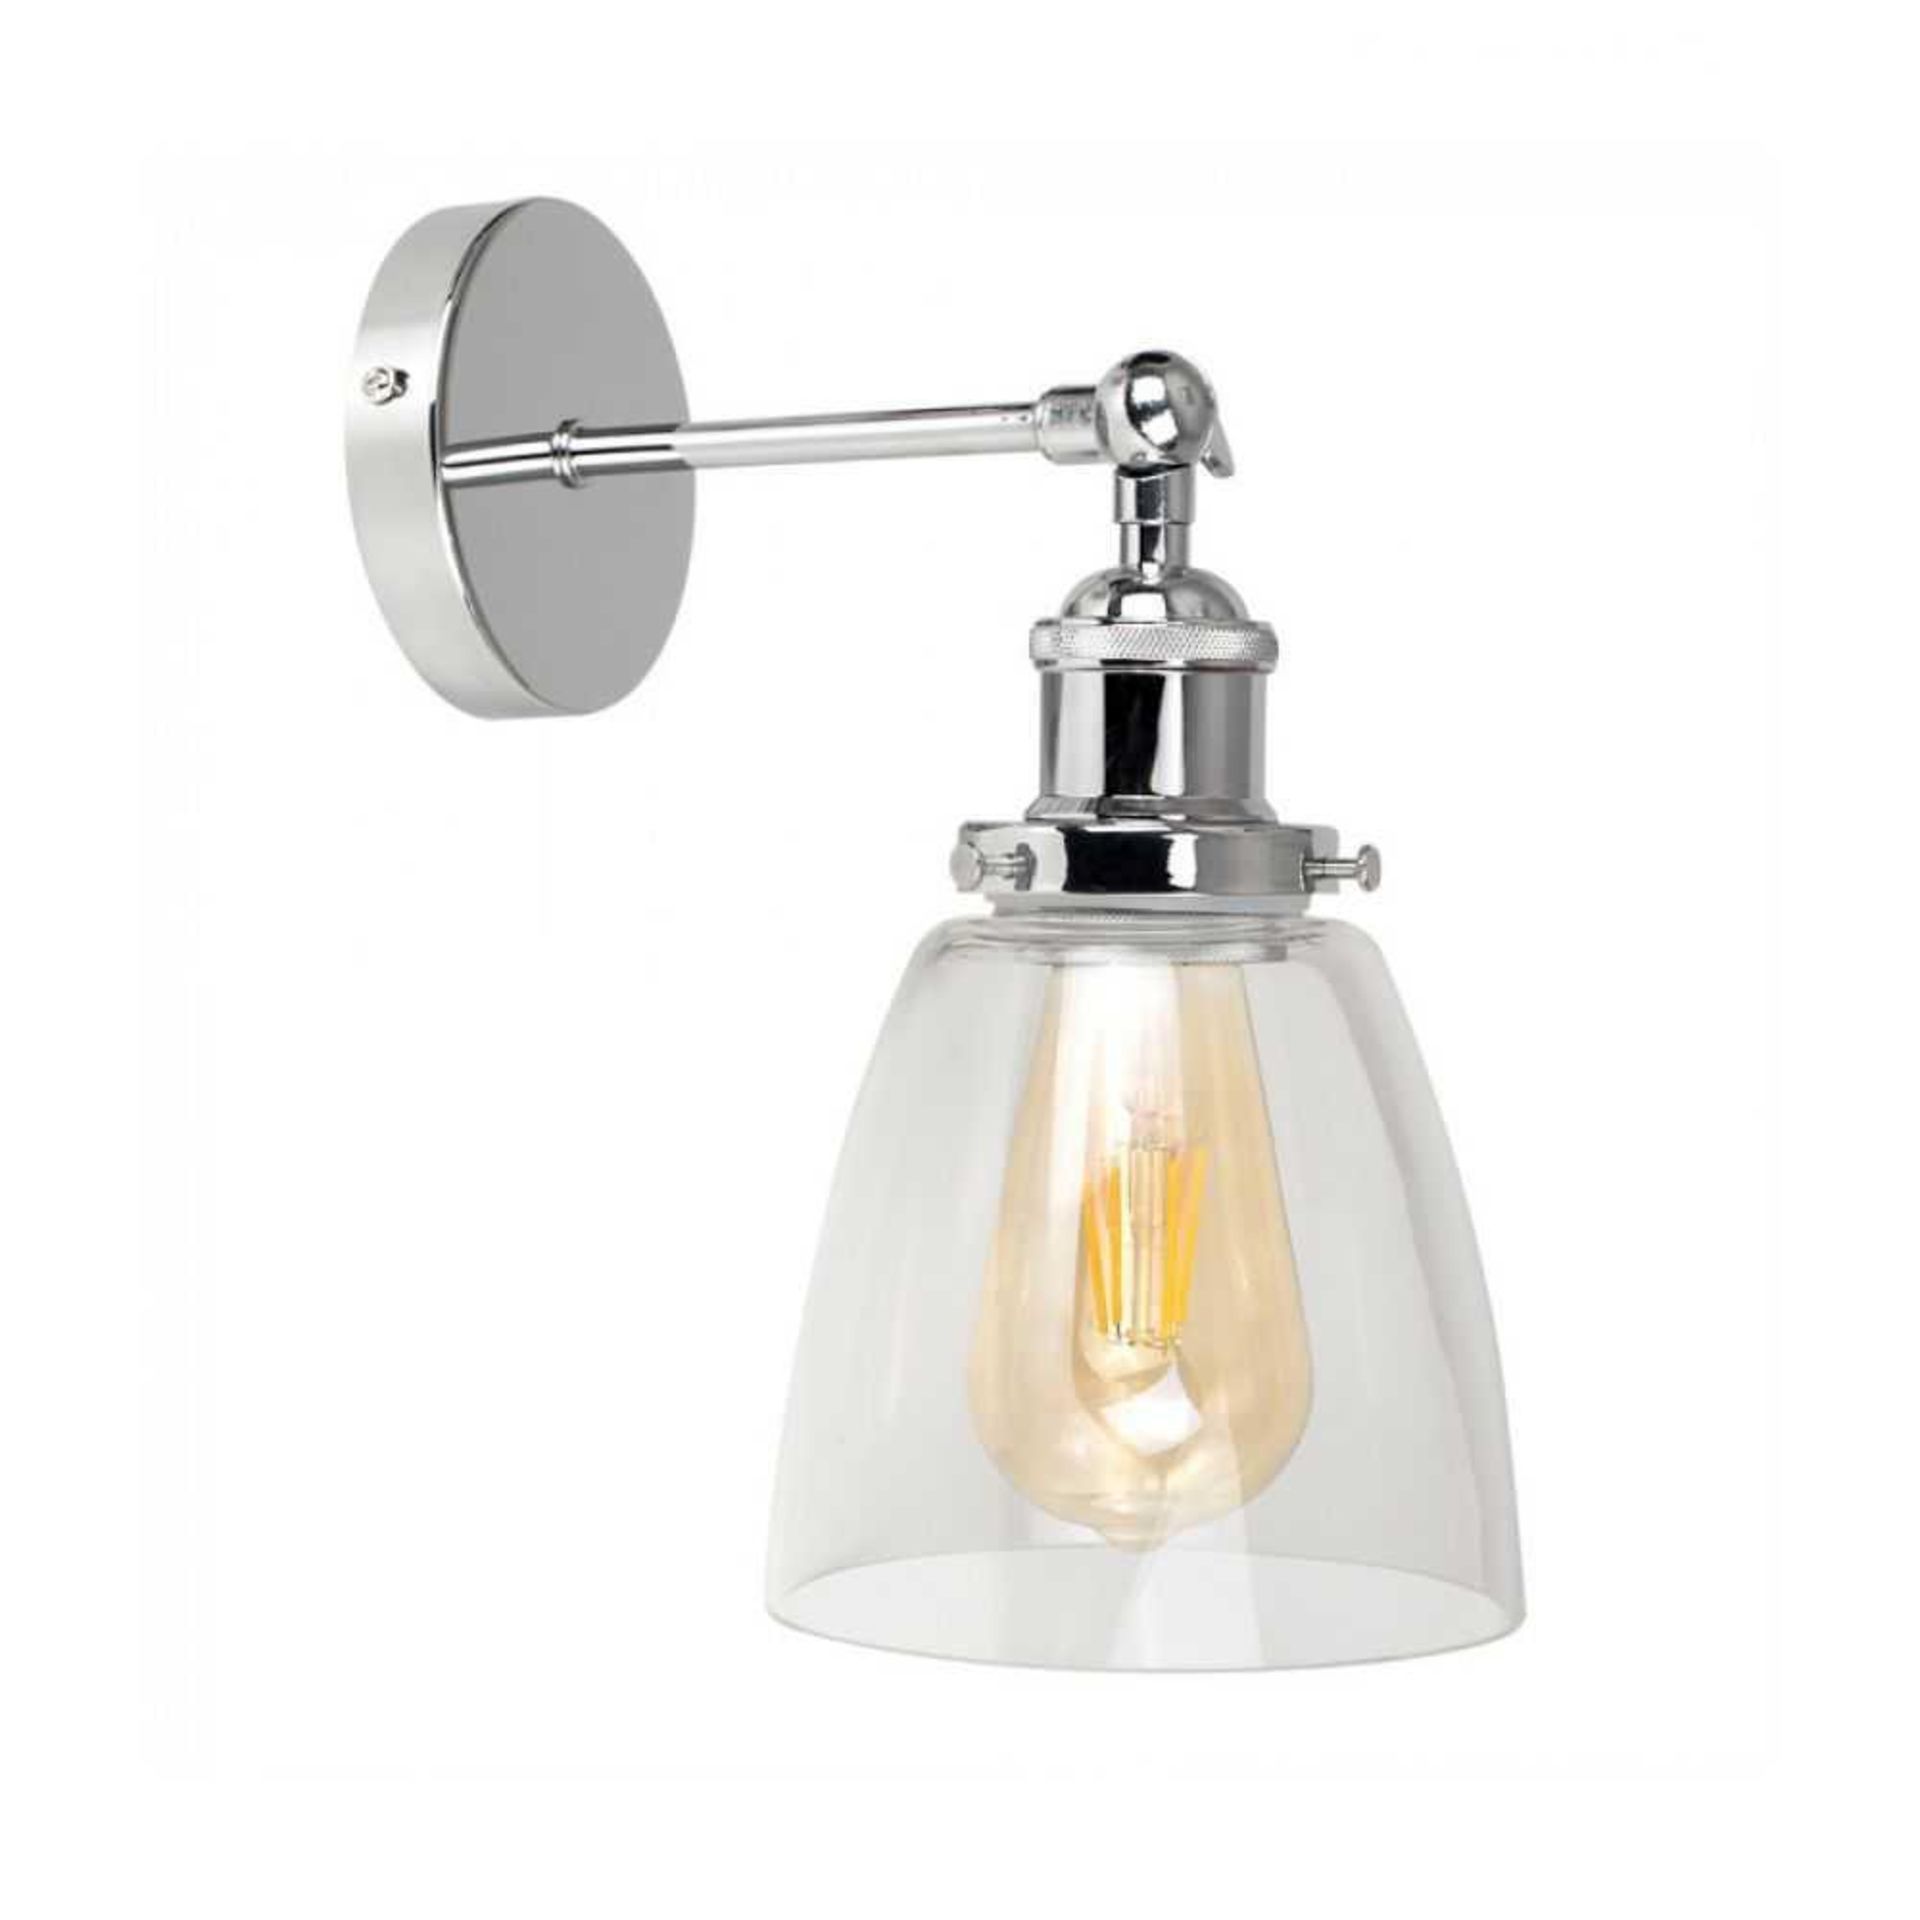 Combined Rrp £60 Boxed Ezrah Chrome Wall Light With Tall Domed Glass Shade